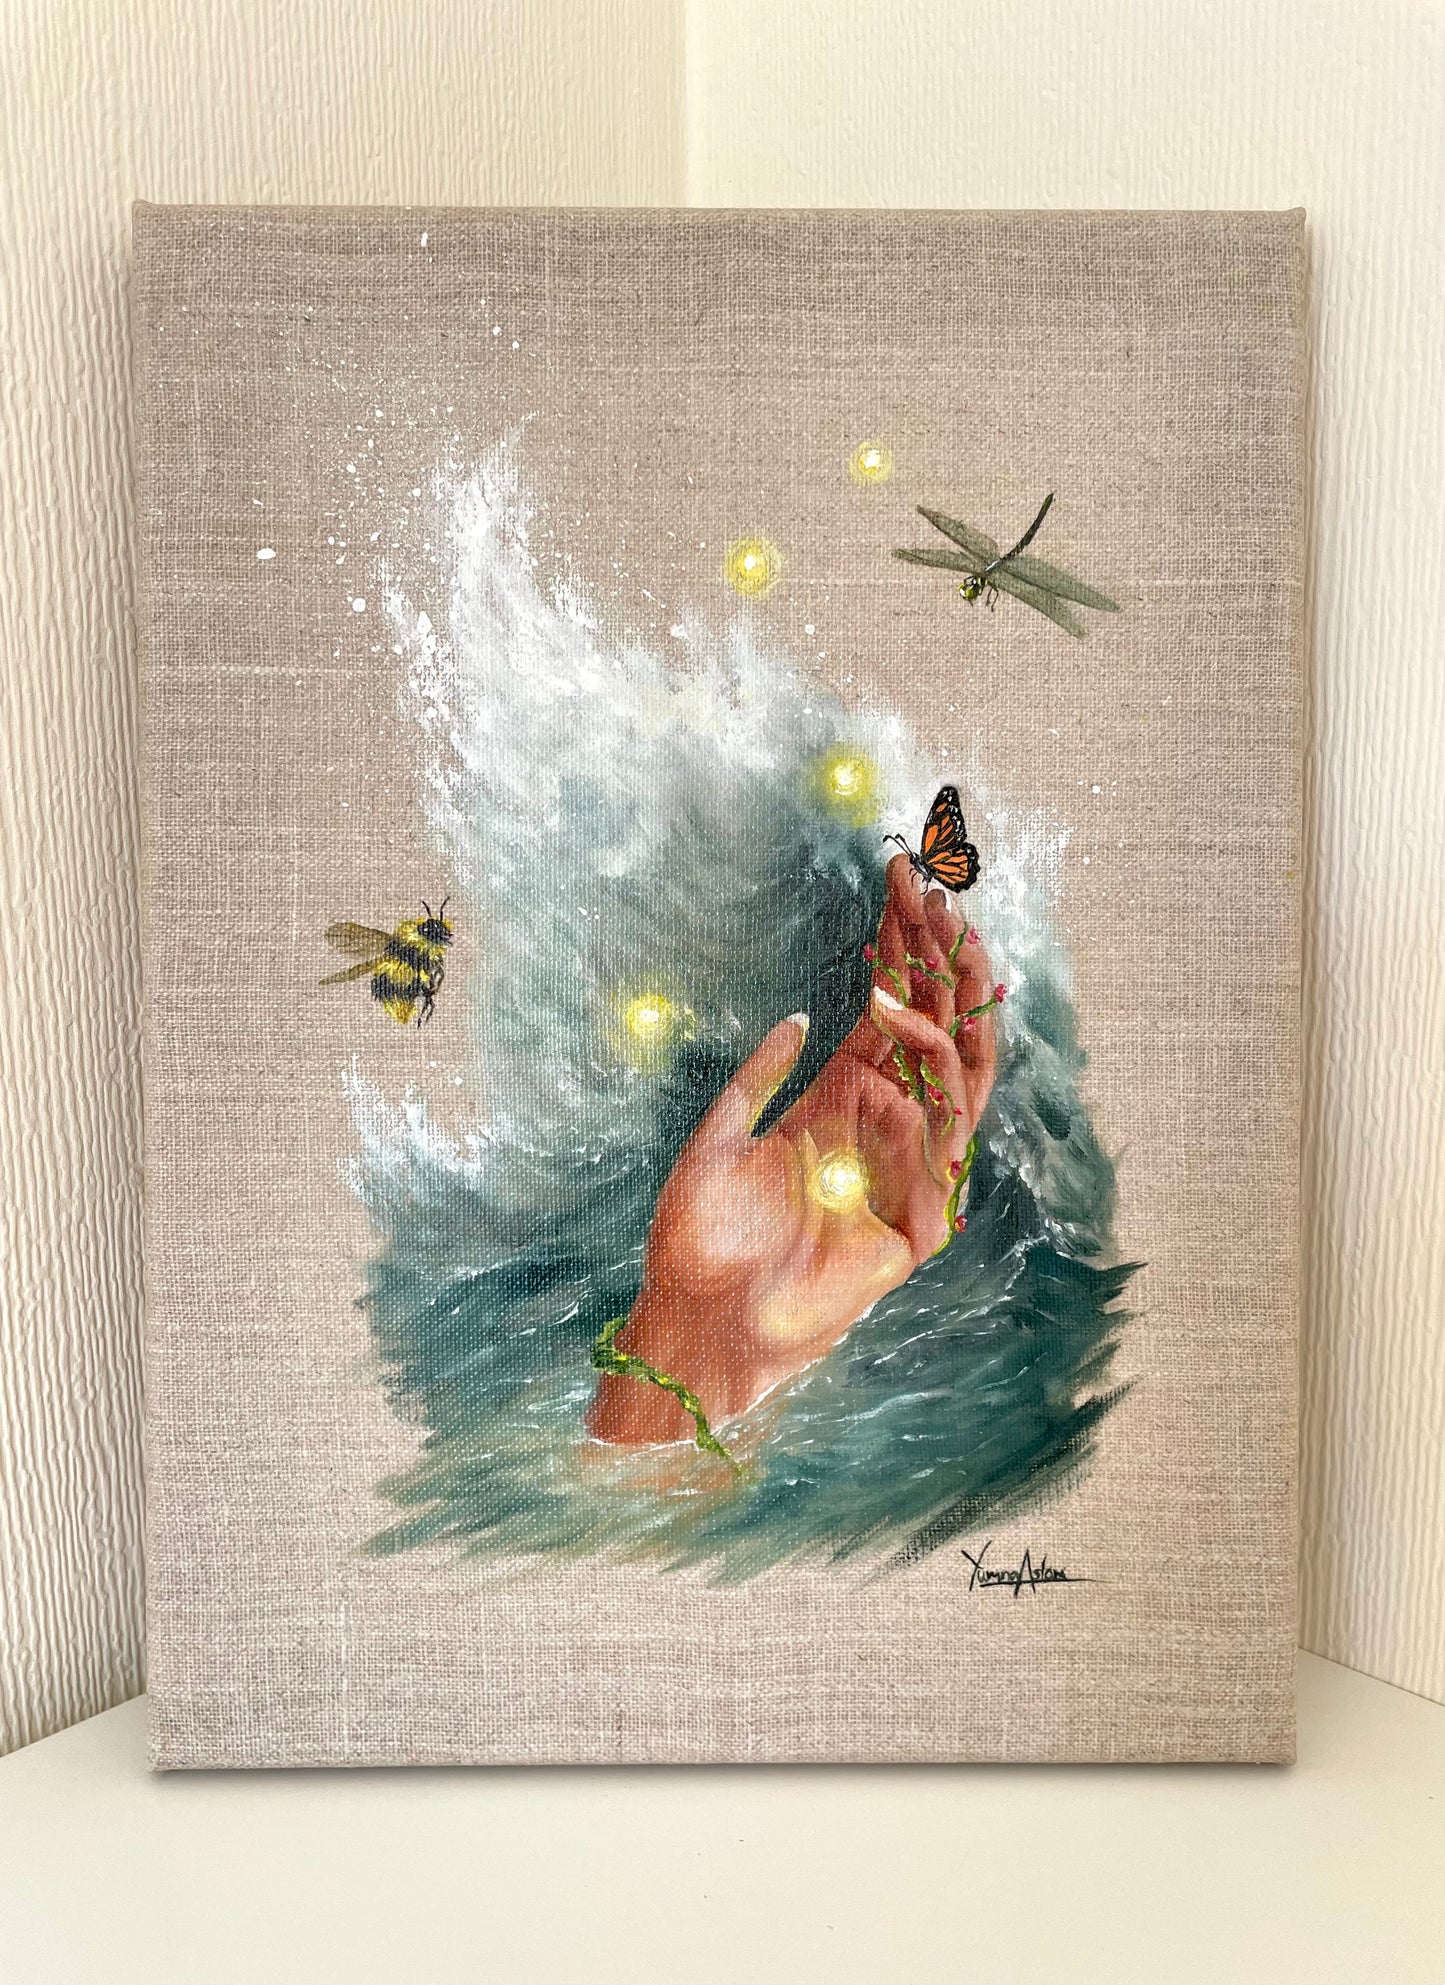 ‘The Miracle’ Original Oil painting